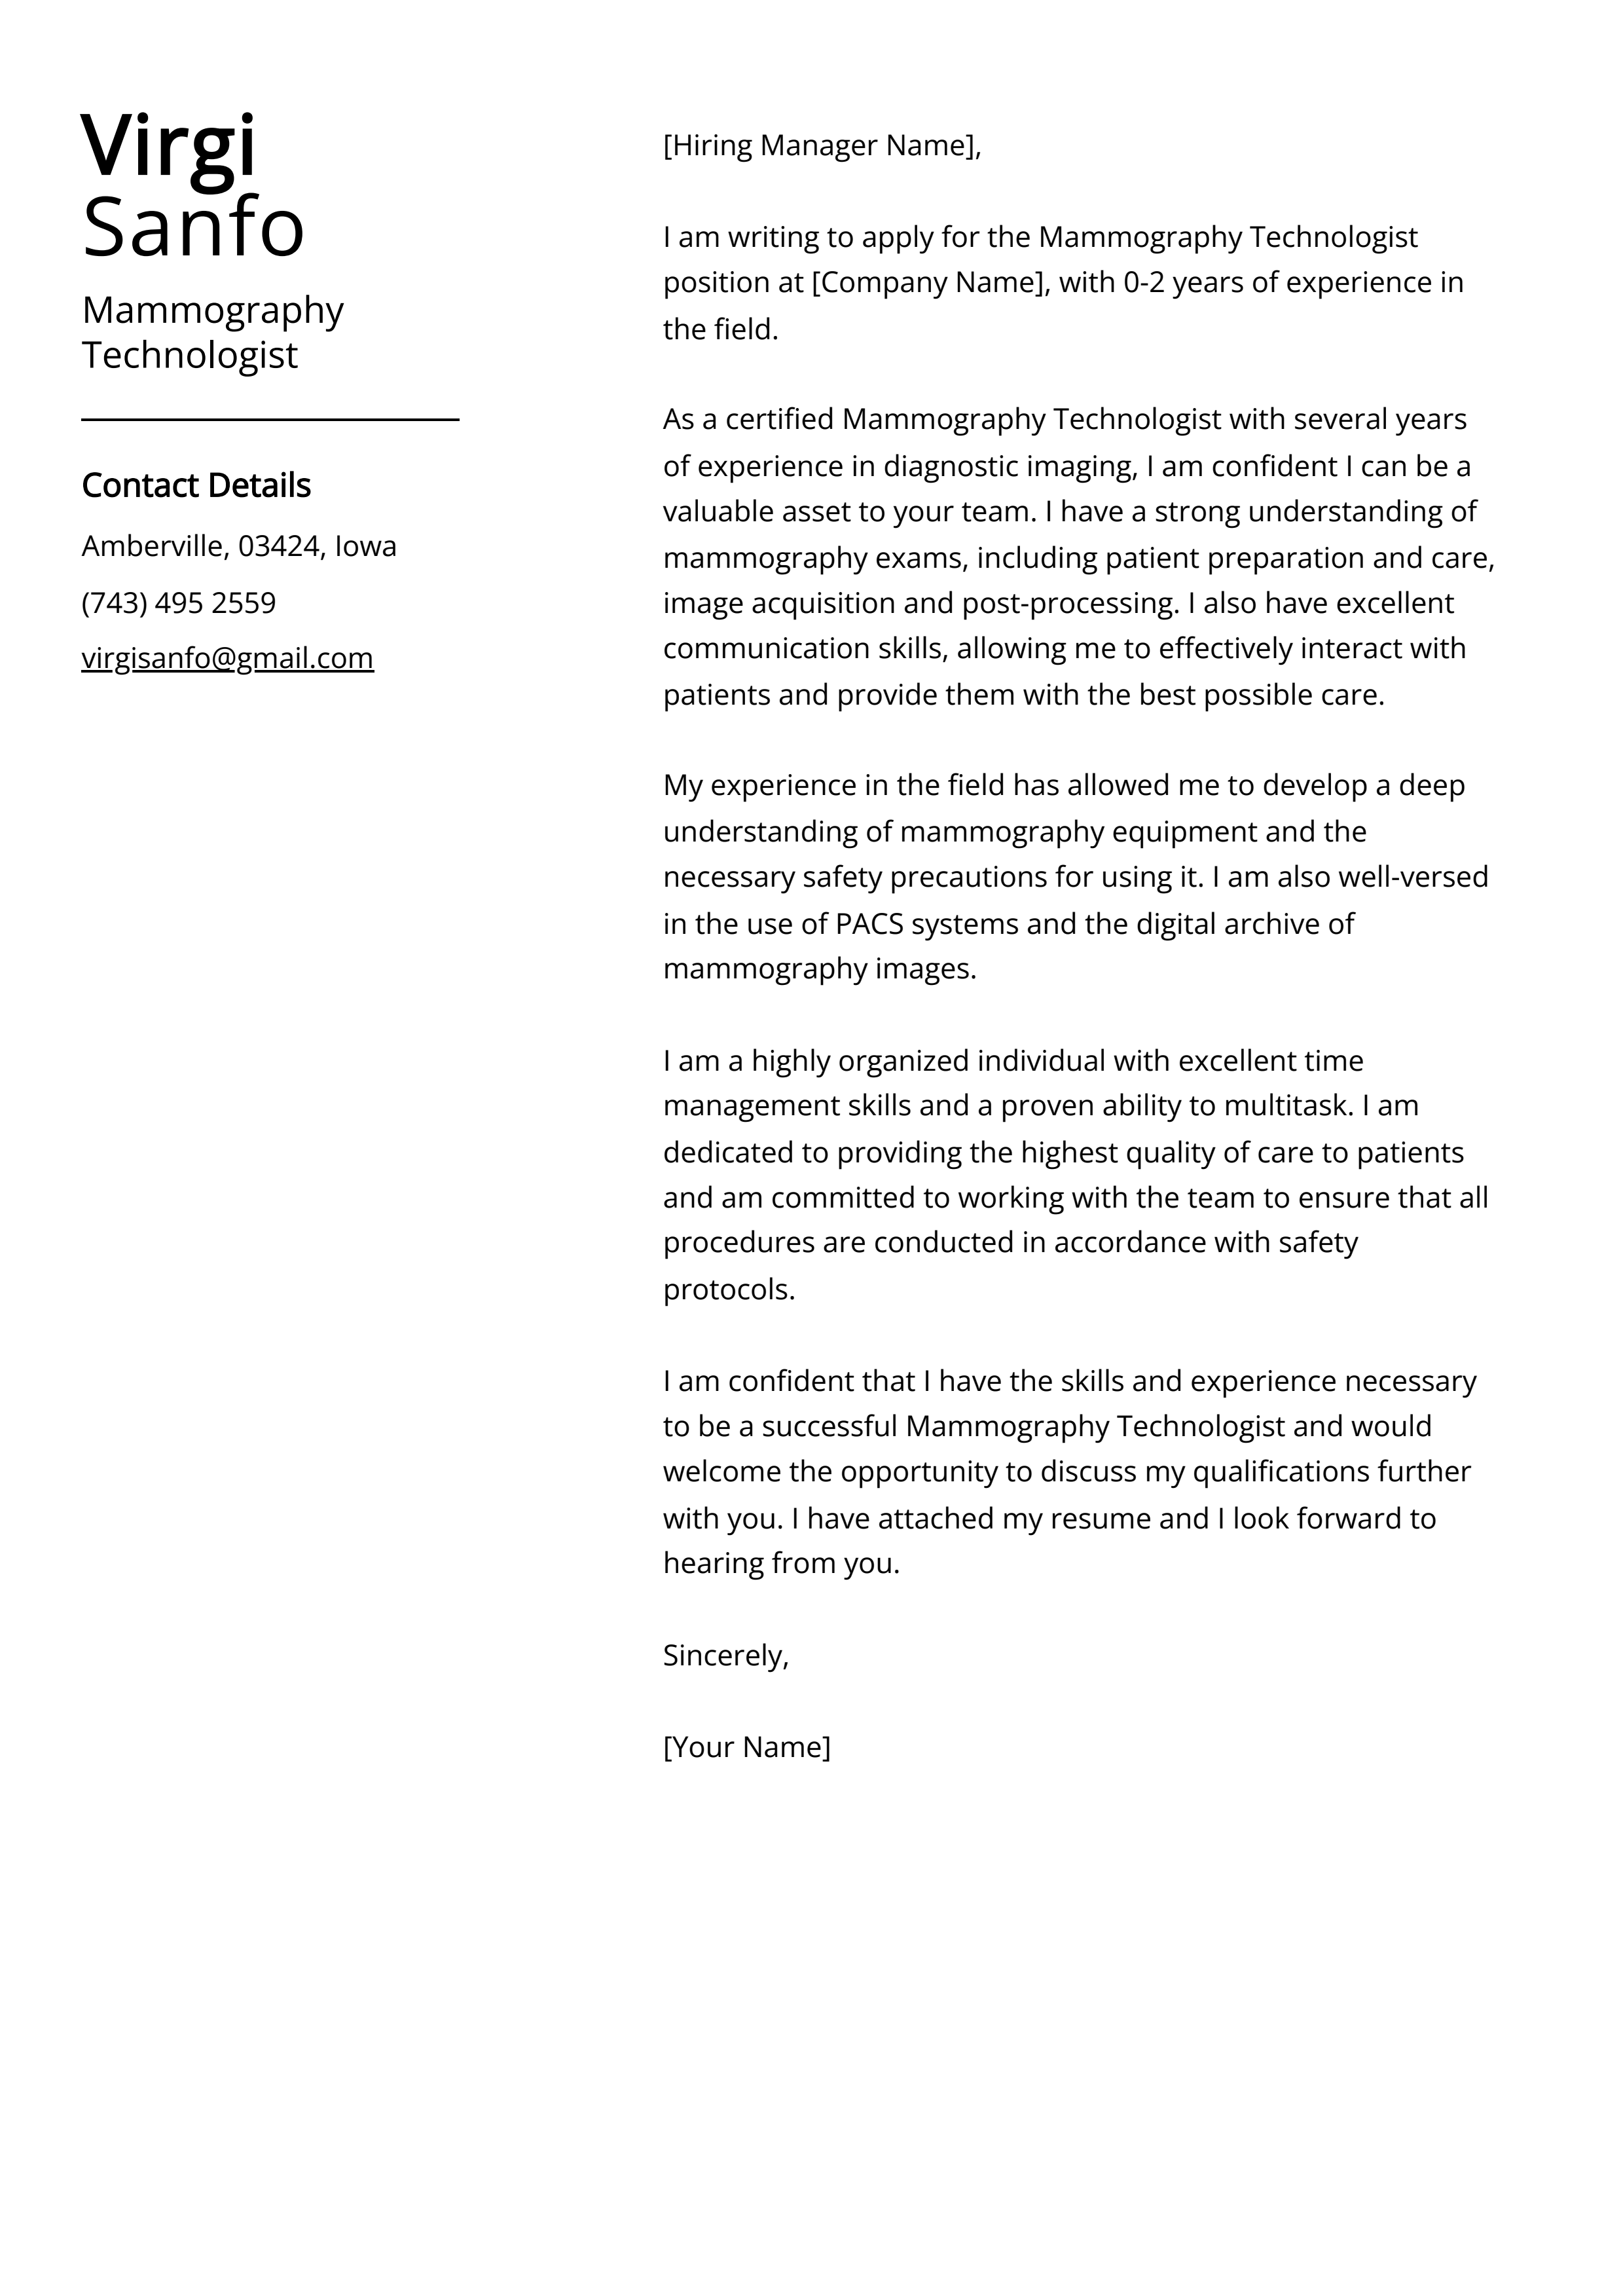 Mammography Technologist Cover Letter Example